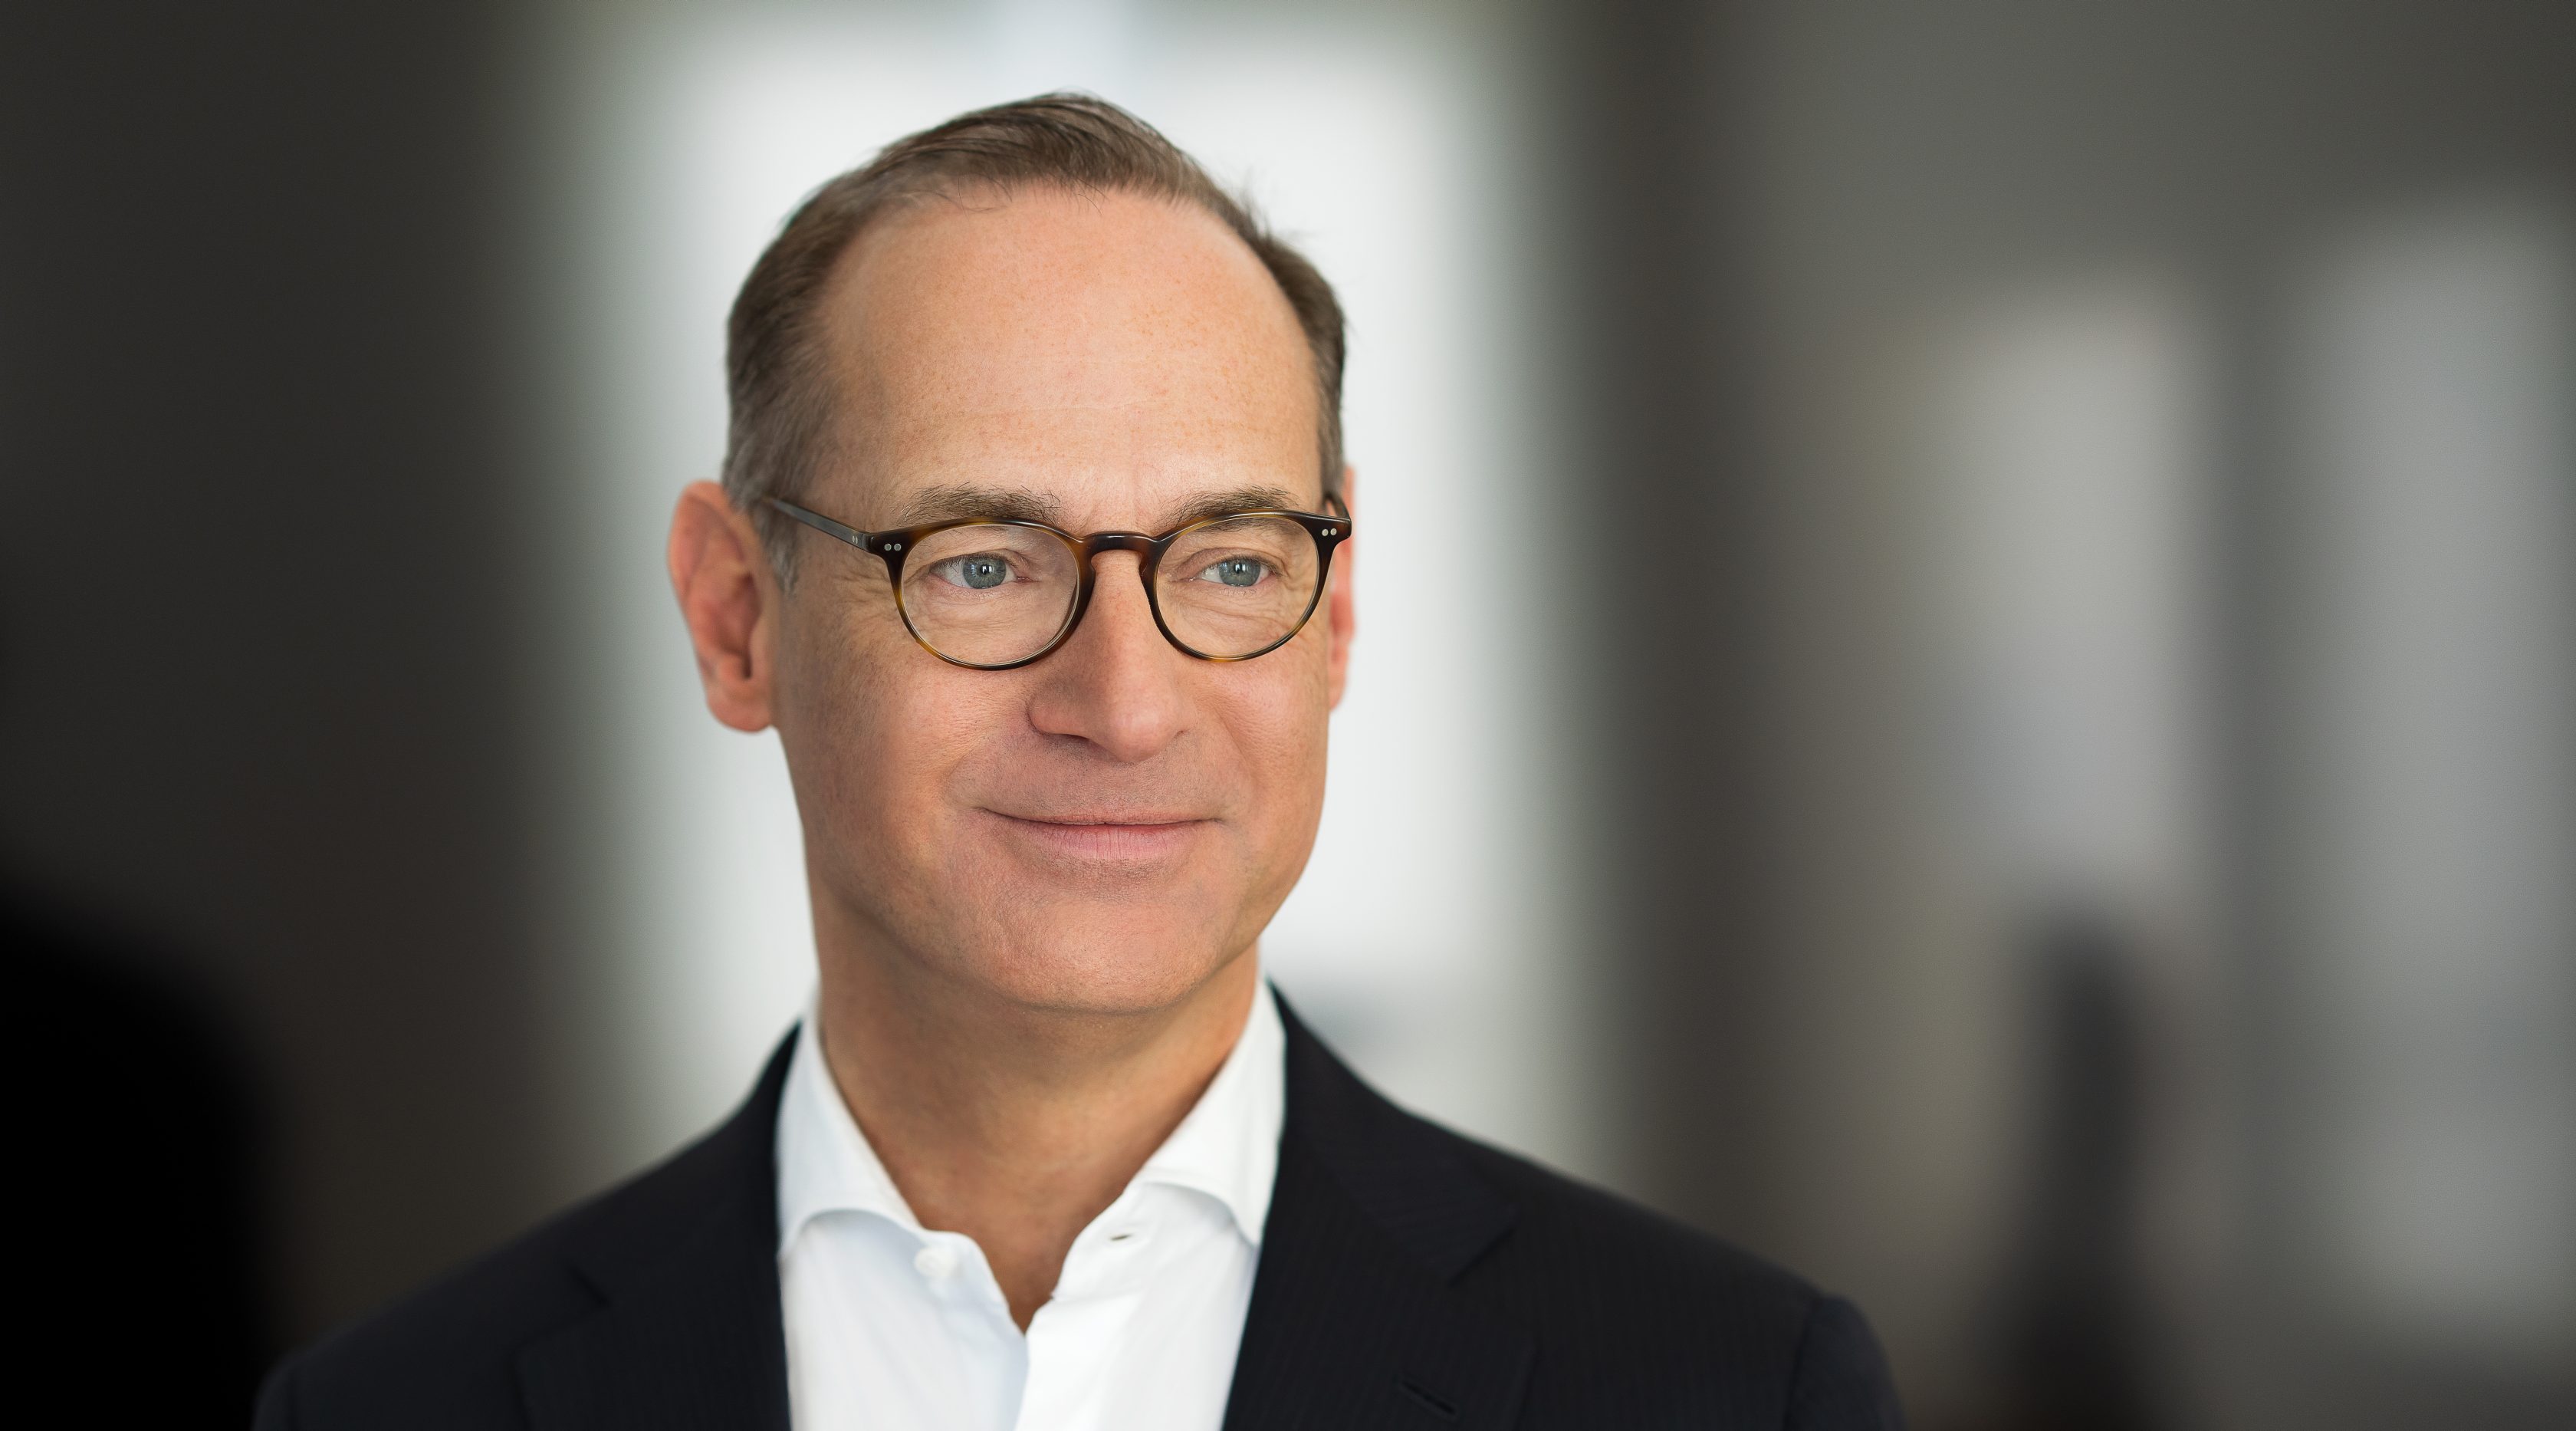 Oliver Bäte, CEO, Chairman of the Board of Management of Allianz SE